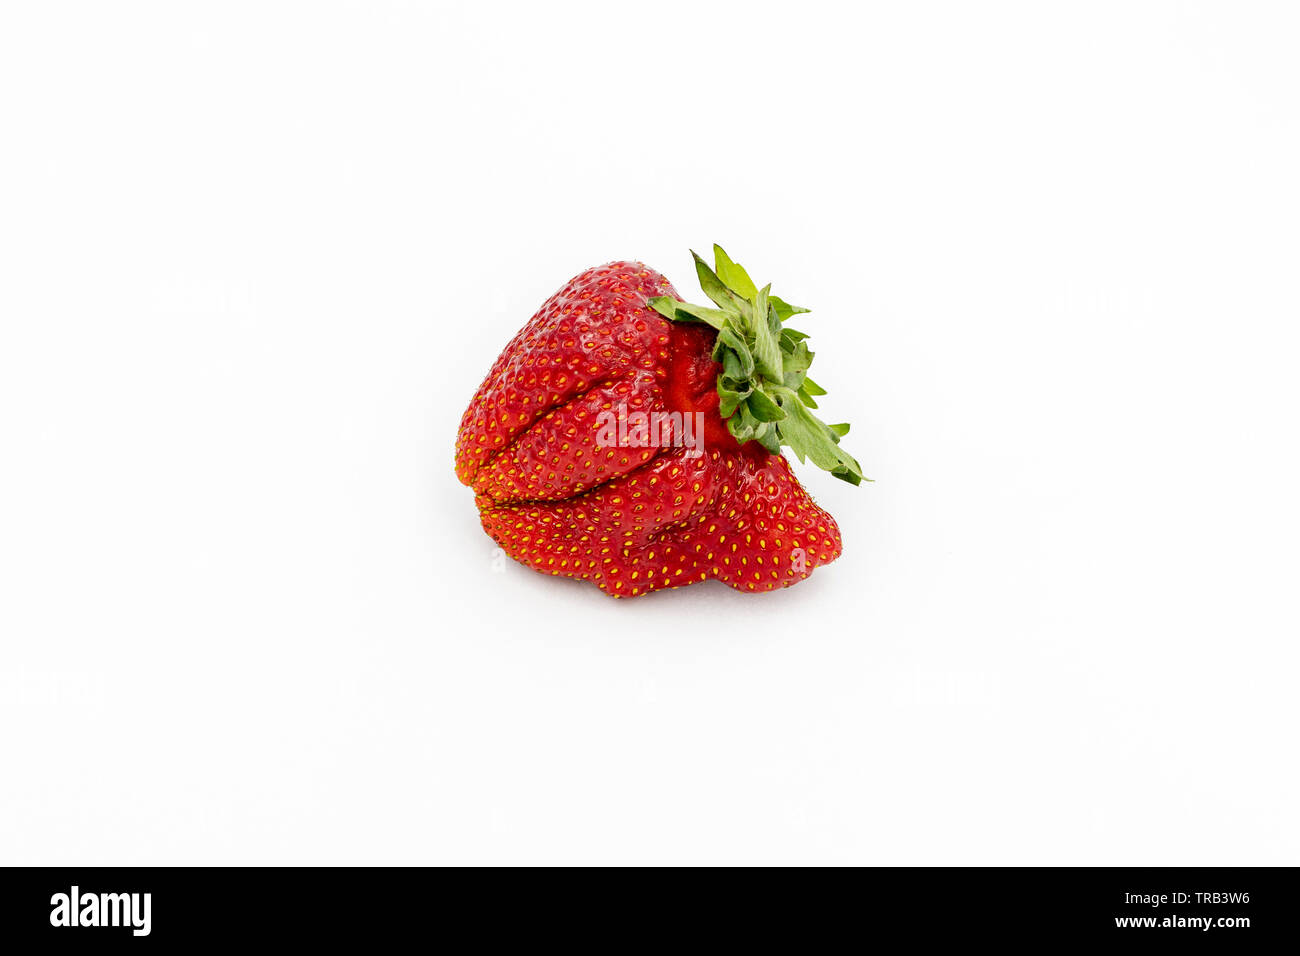 Imperfect Fresh Organic Strawberry. Isolated Fruit Closeup. Red Juicy Berry for Natural Raw Diet. Summer Organic Nutrition. Natural Grown Imperfect Fo Stock Photo